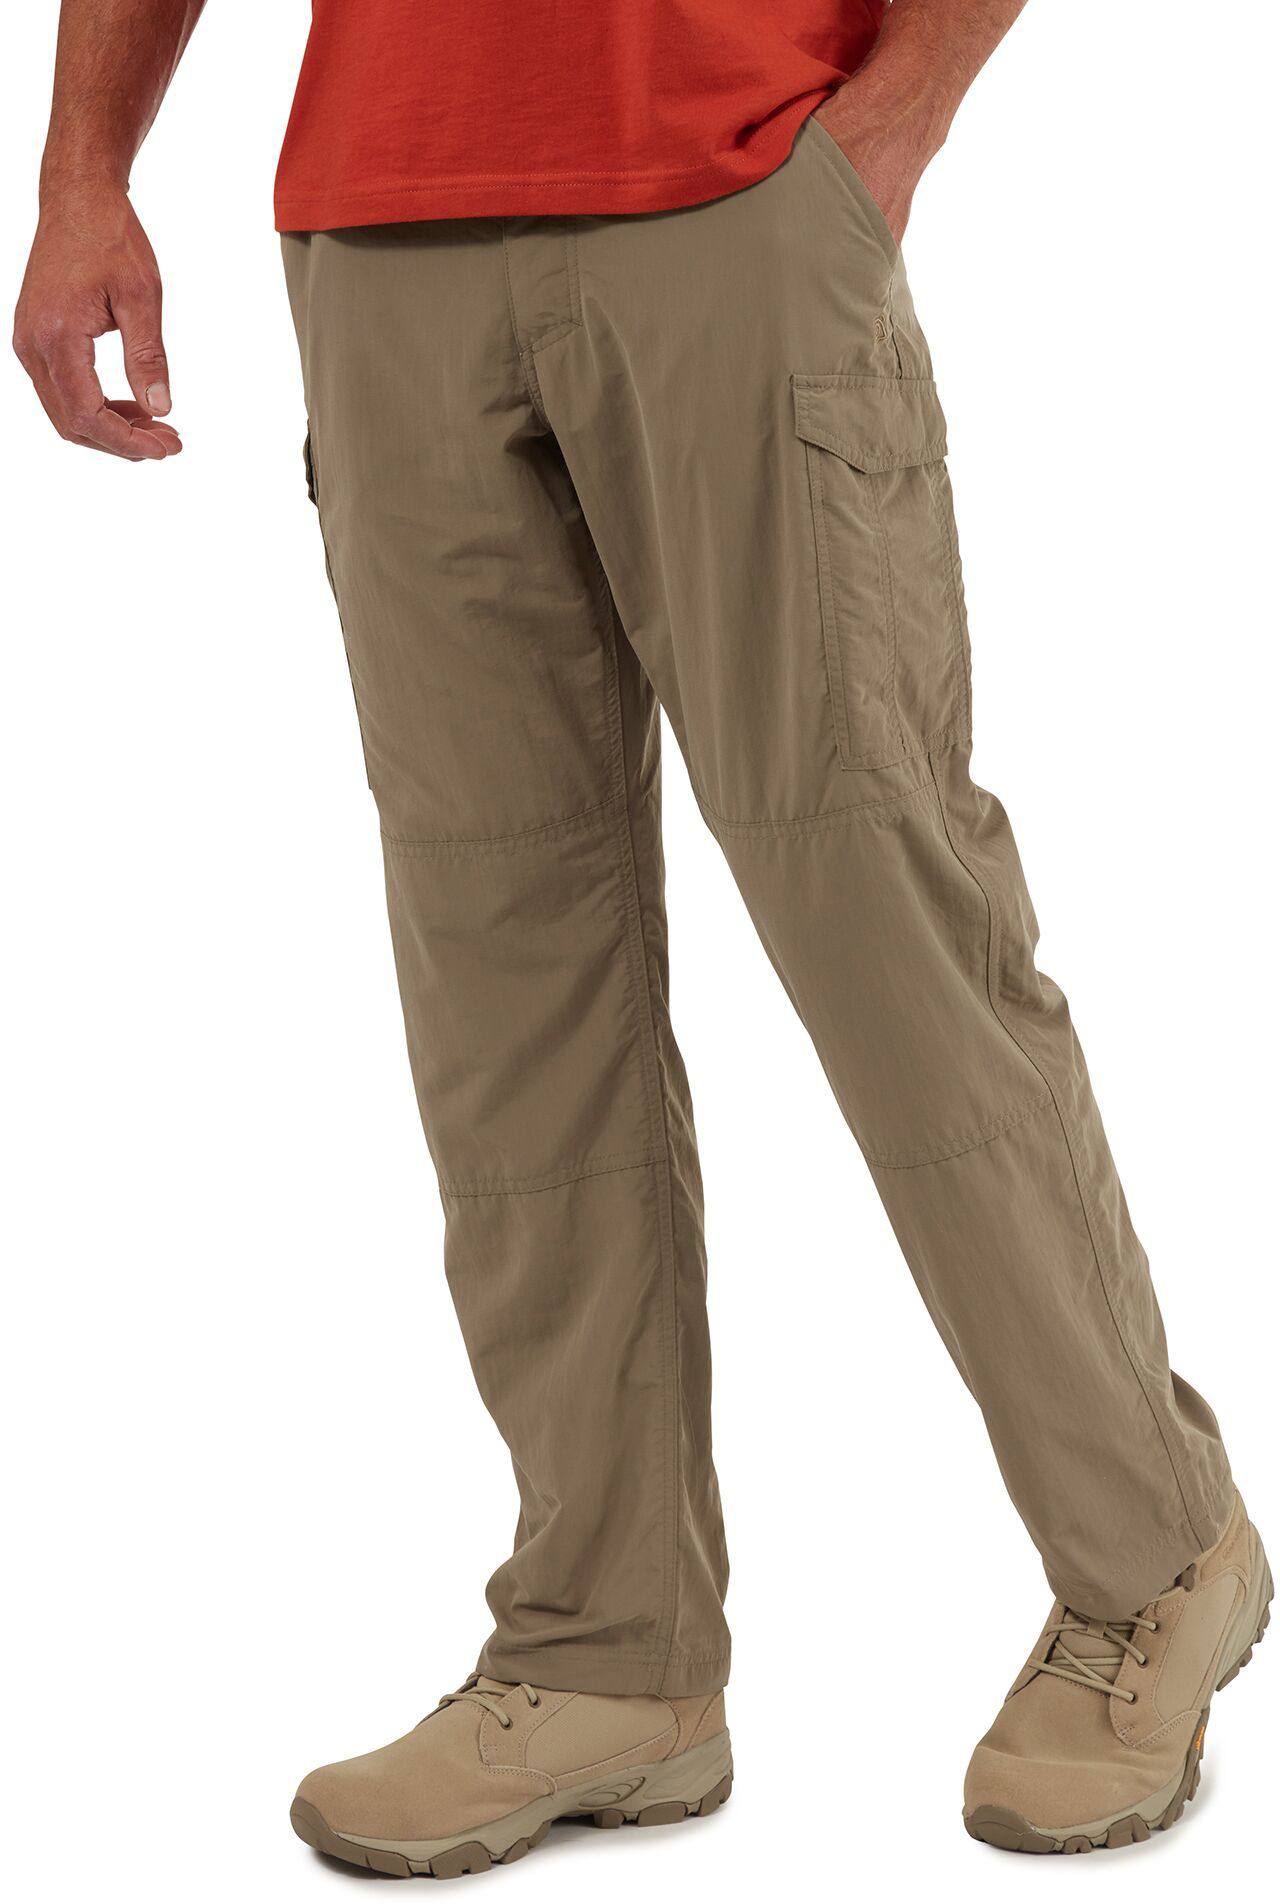 Craghoppers Nosilife Cargo Long Trousers Beige 34